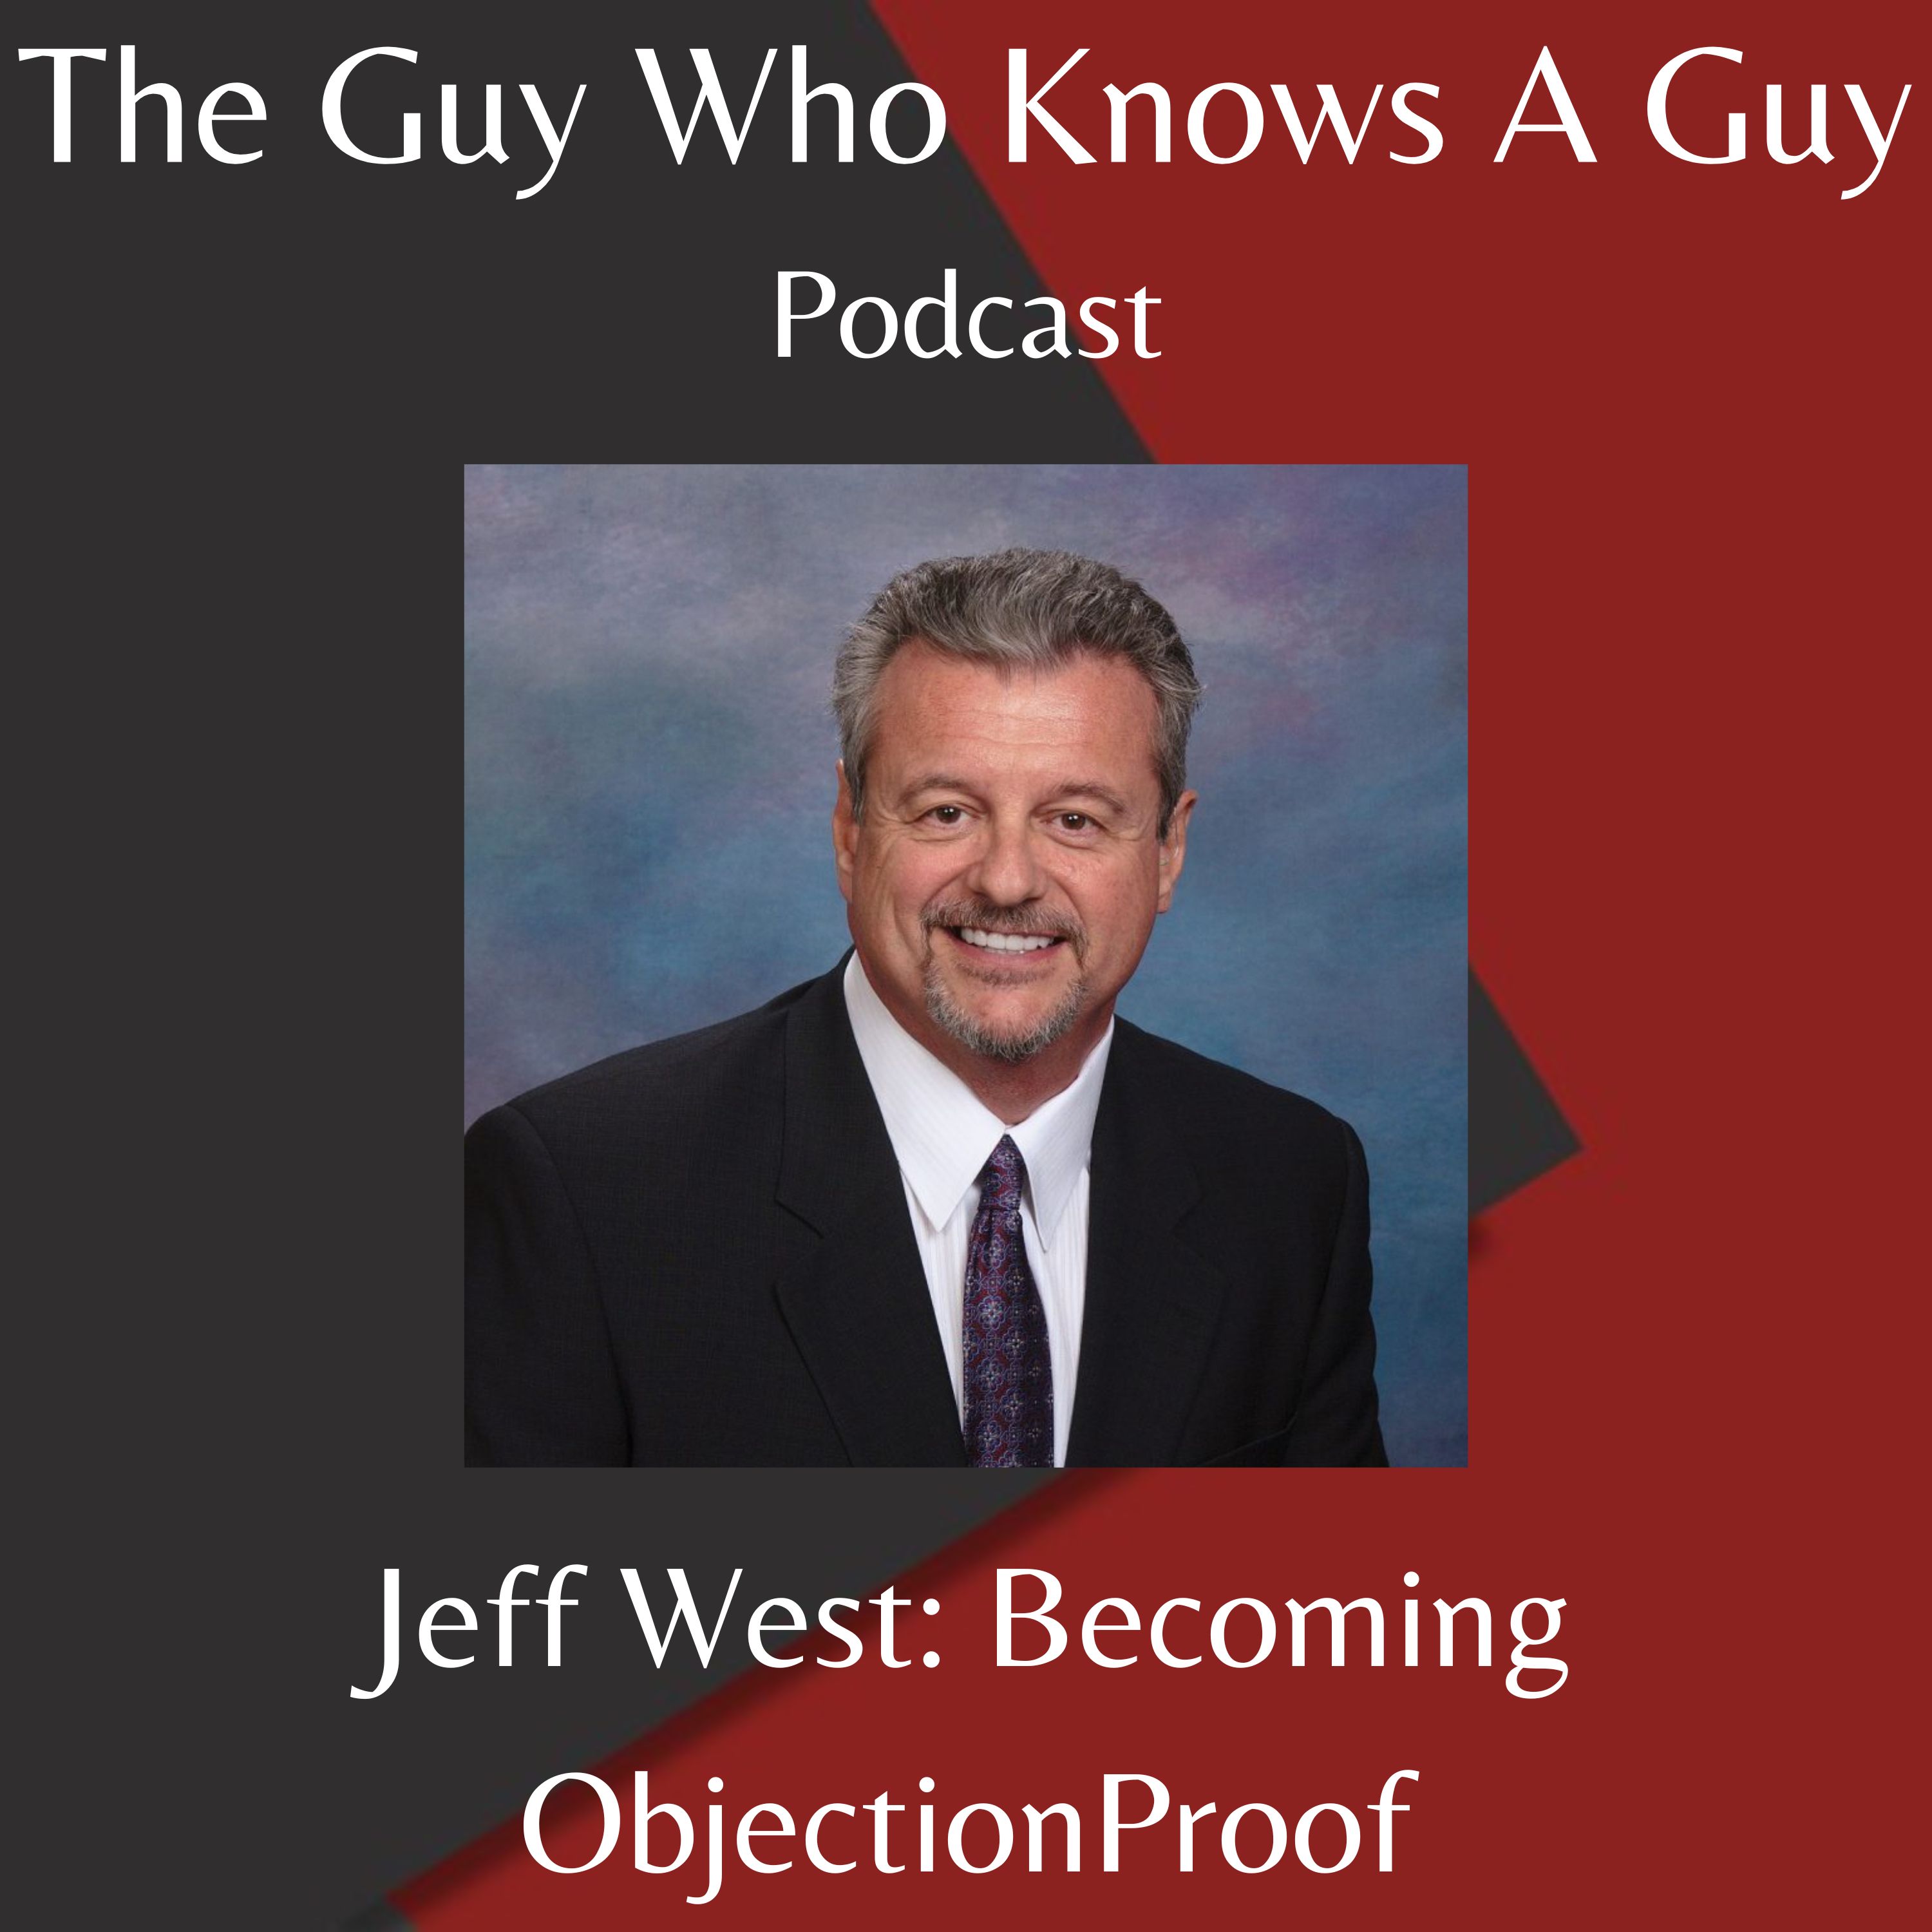 Jeff West: Becoming ObjectionProof